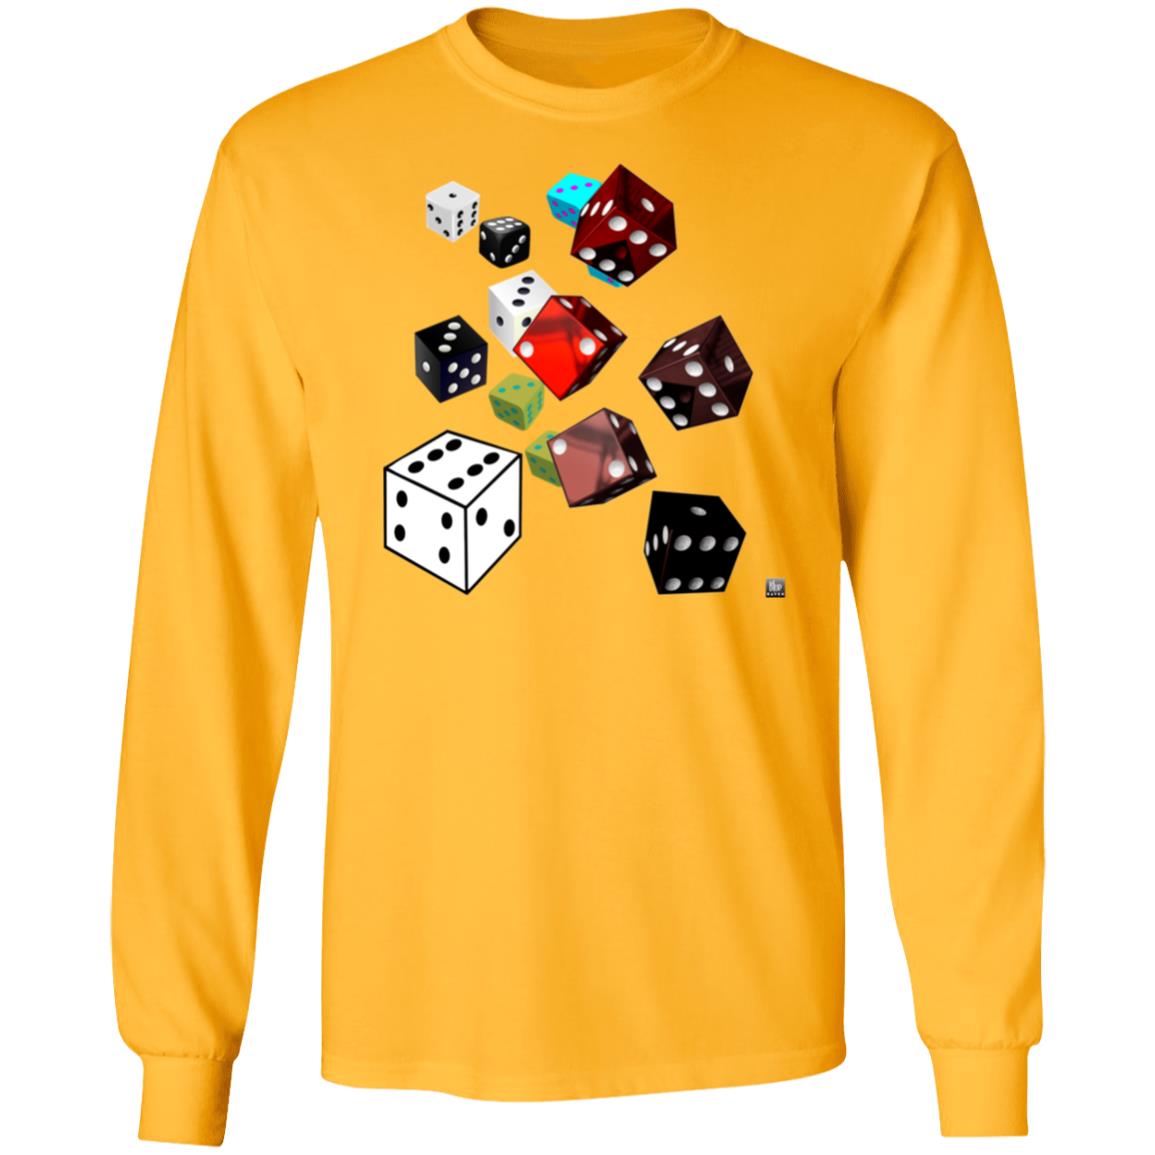 Roll Of The Dice - Men's Long Sleeve T-Shirt